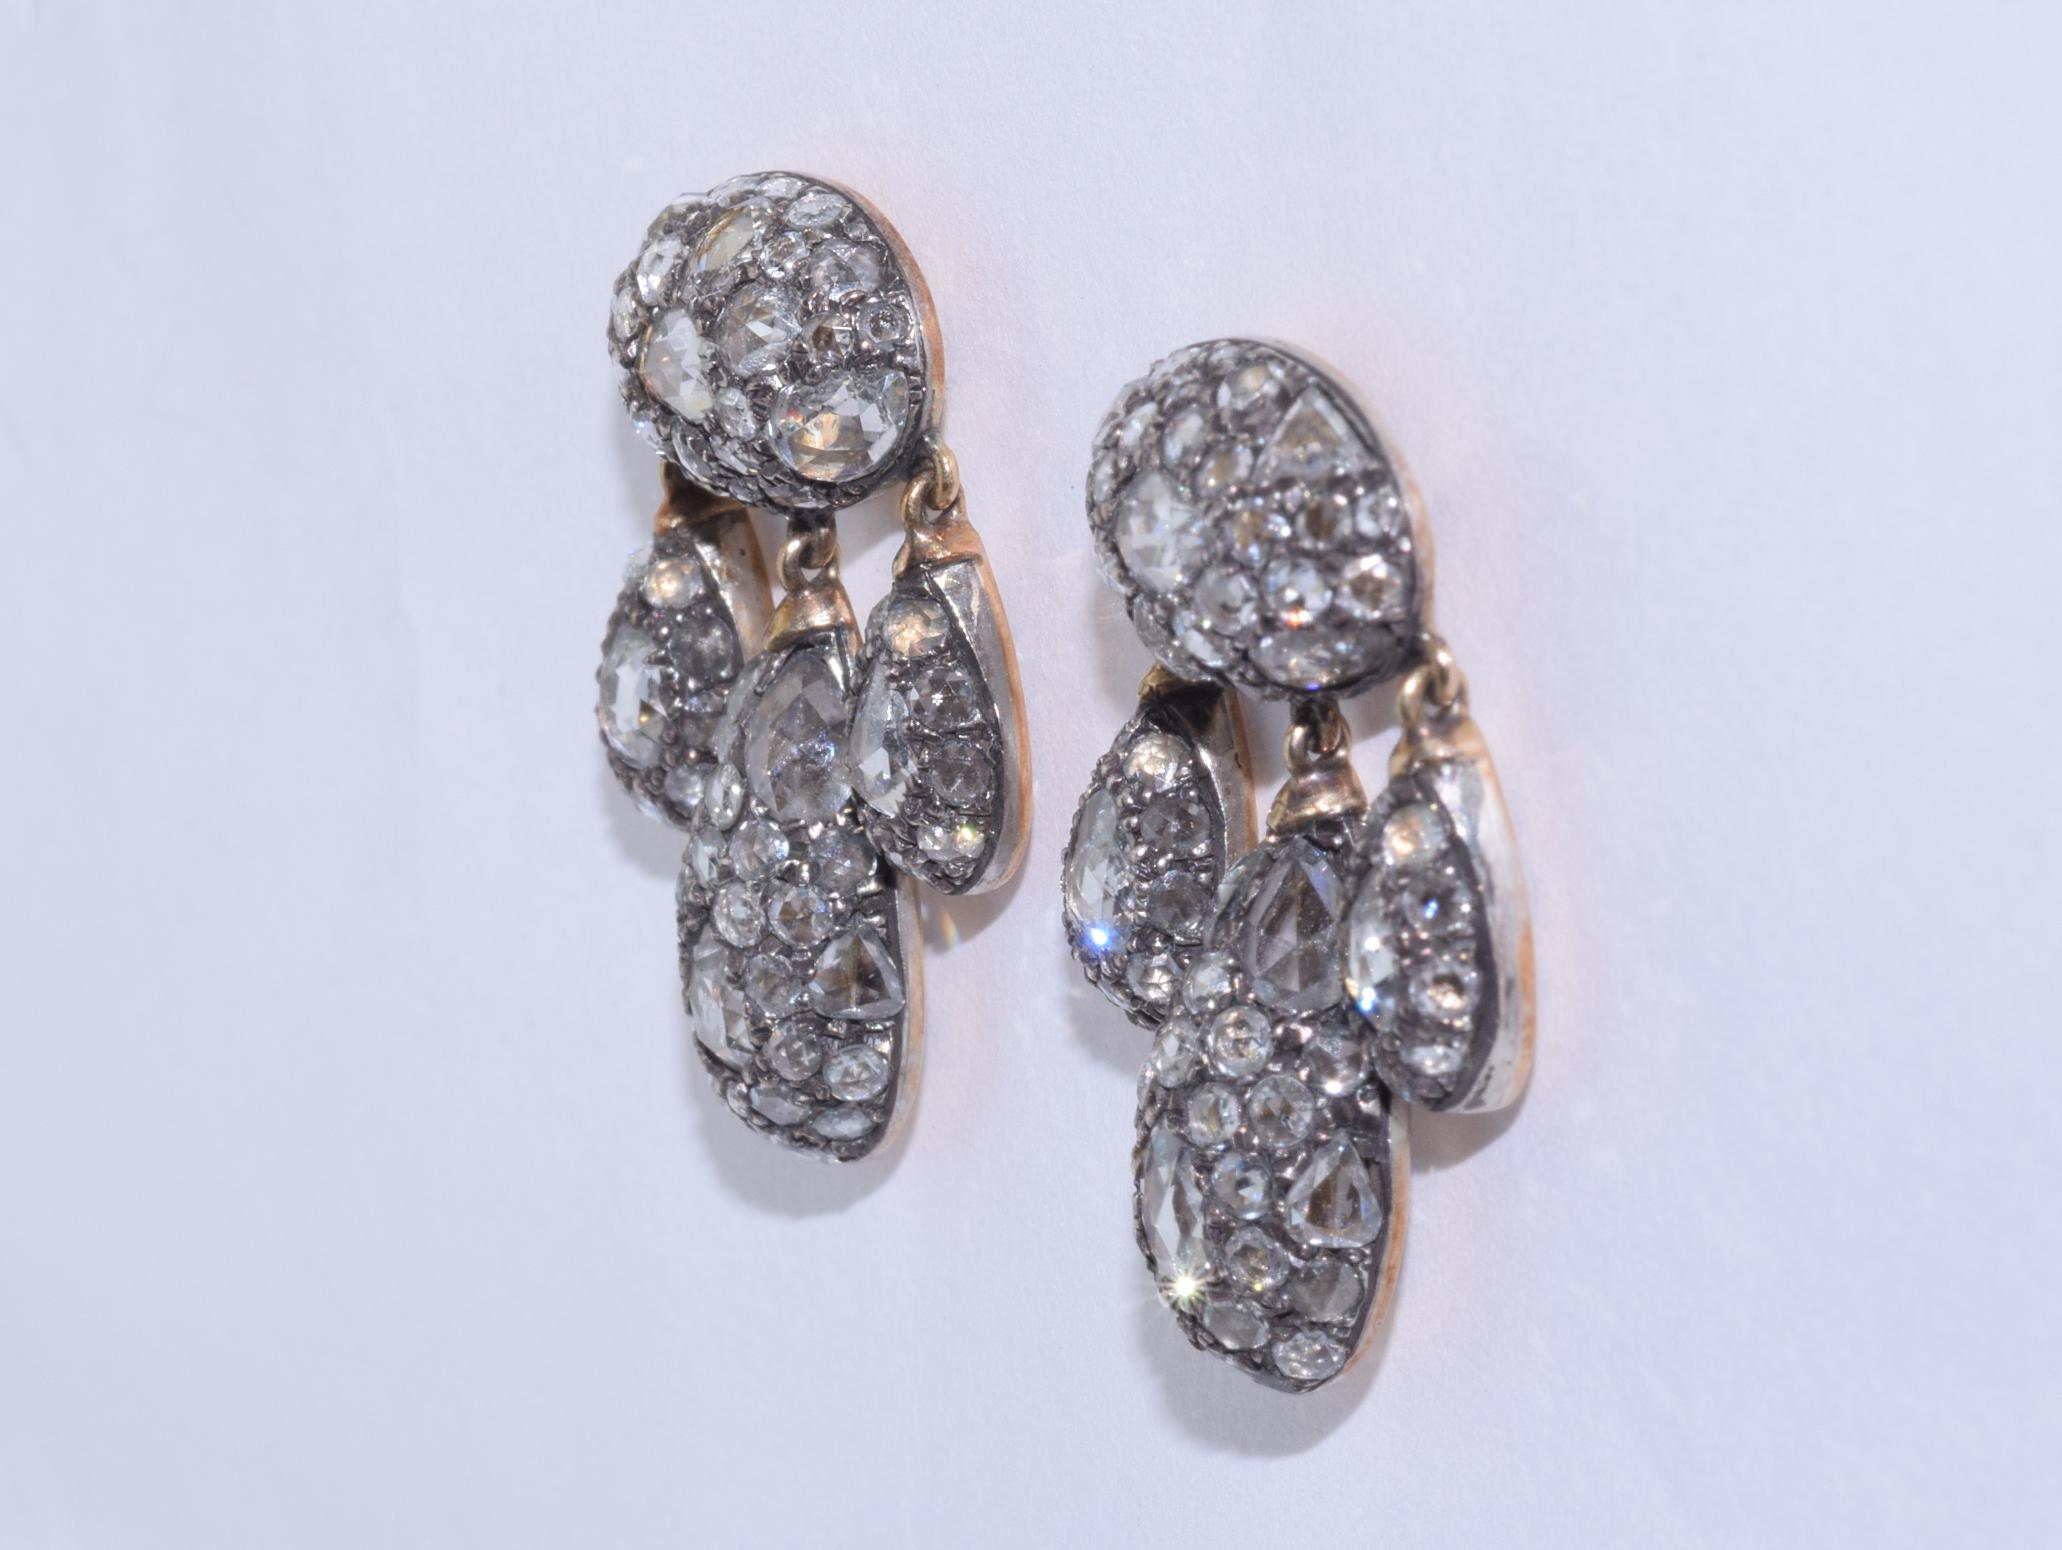 Modern girandoles are set with mixed shape rose cut diamonds totaling approximately 7.96 carats mounted in silver topped 18 karat yellow gold. The earrings measure 1 inch in length and 1/2 inch in width.